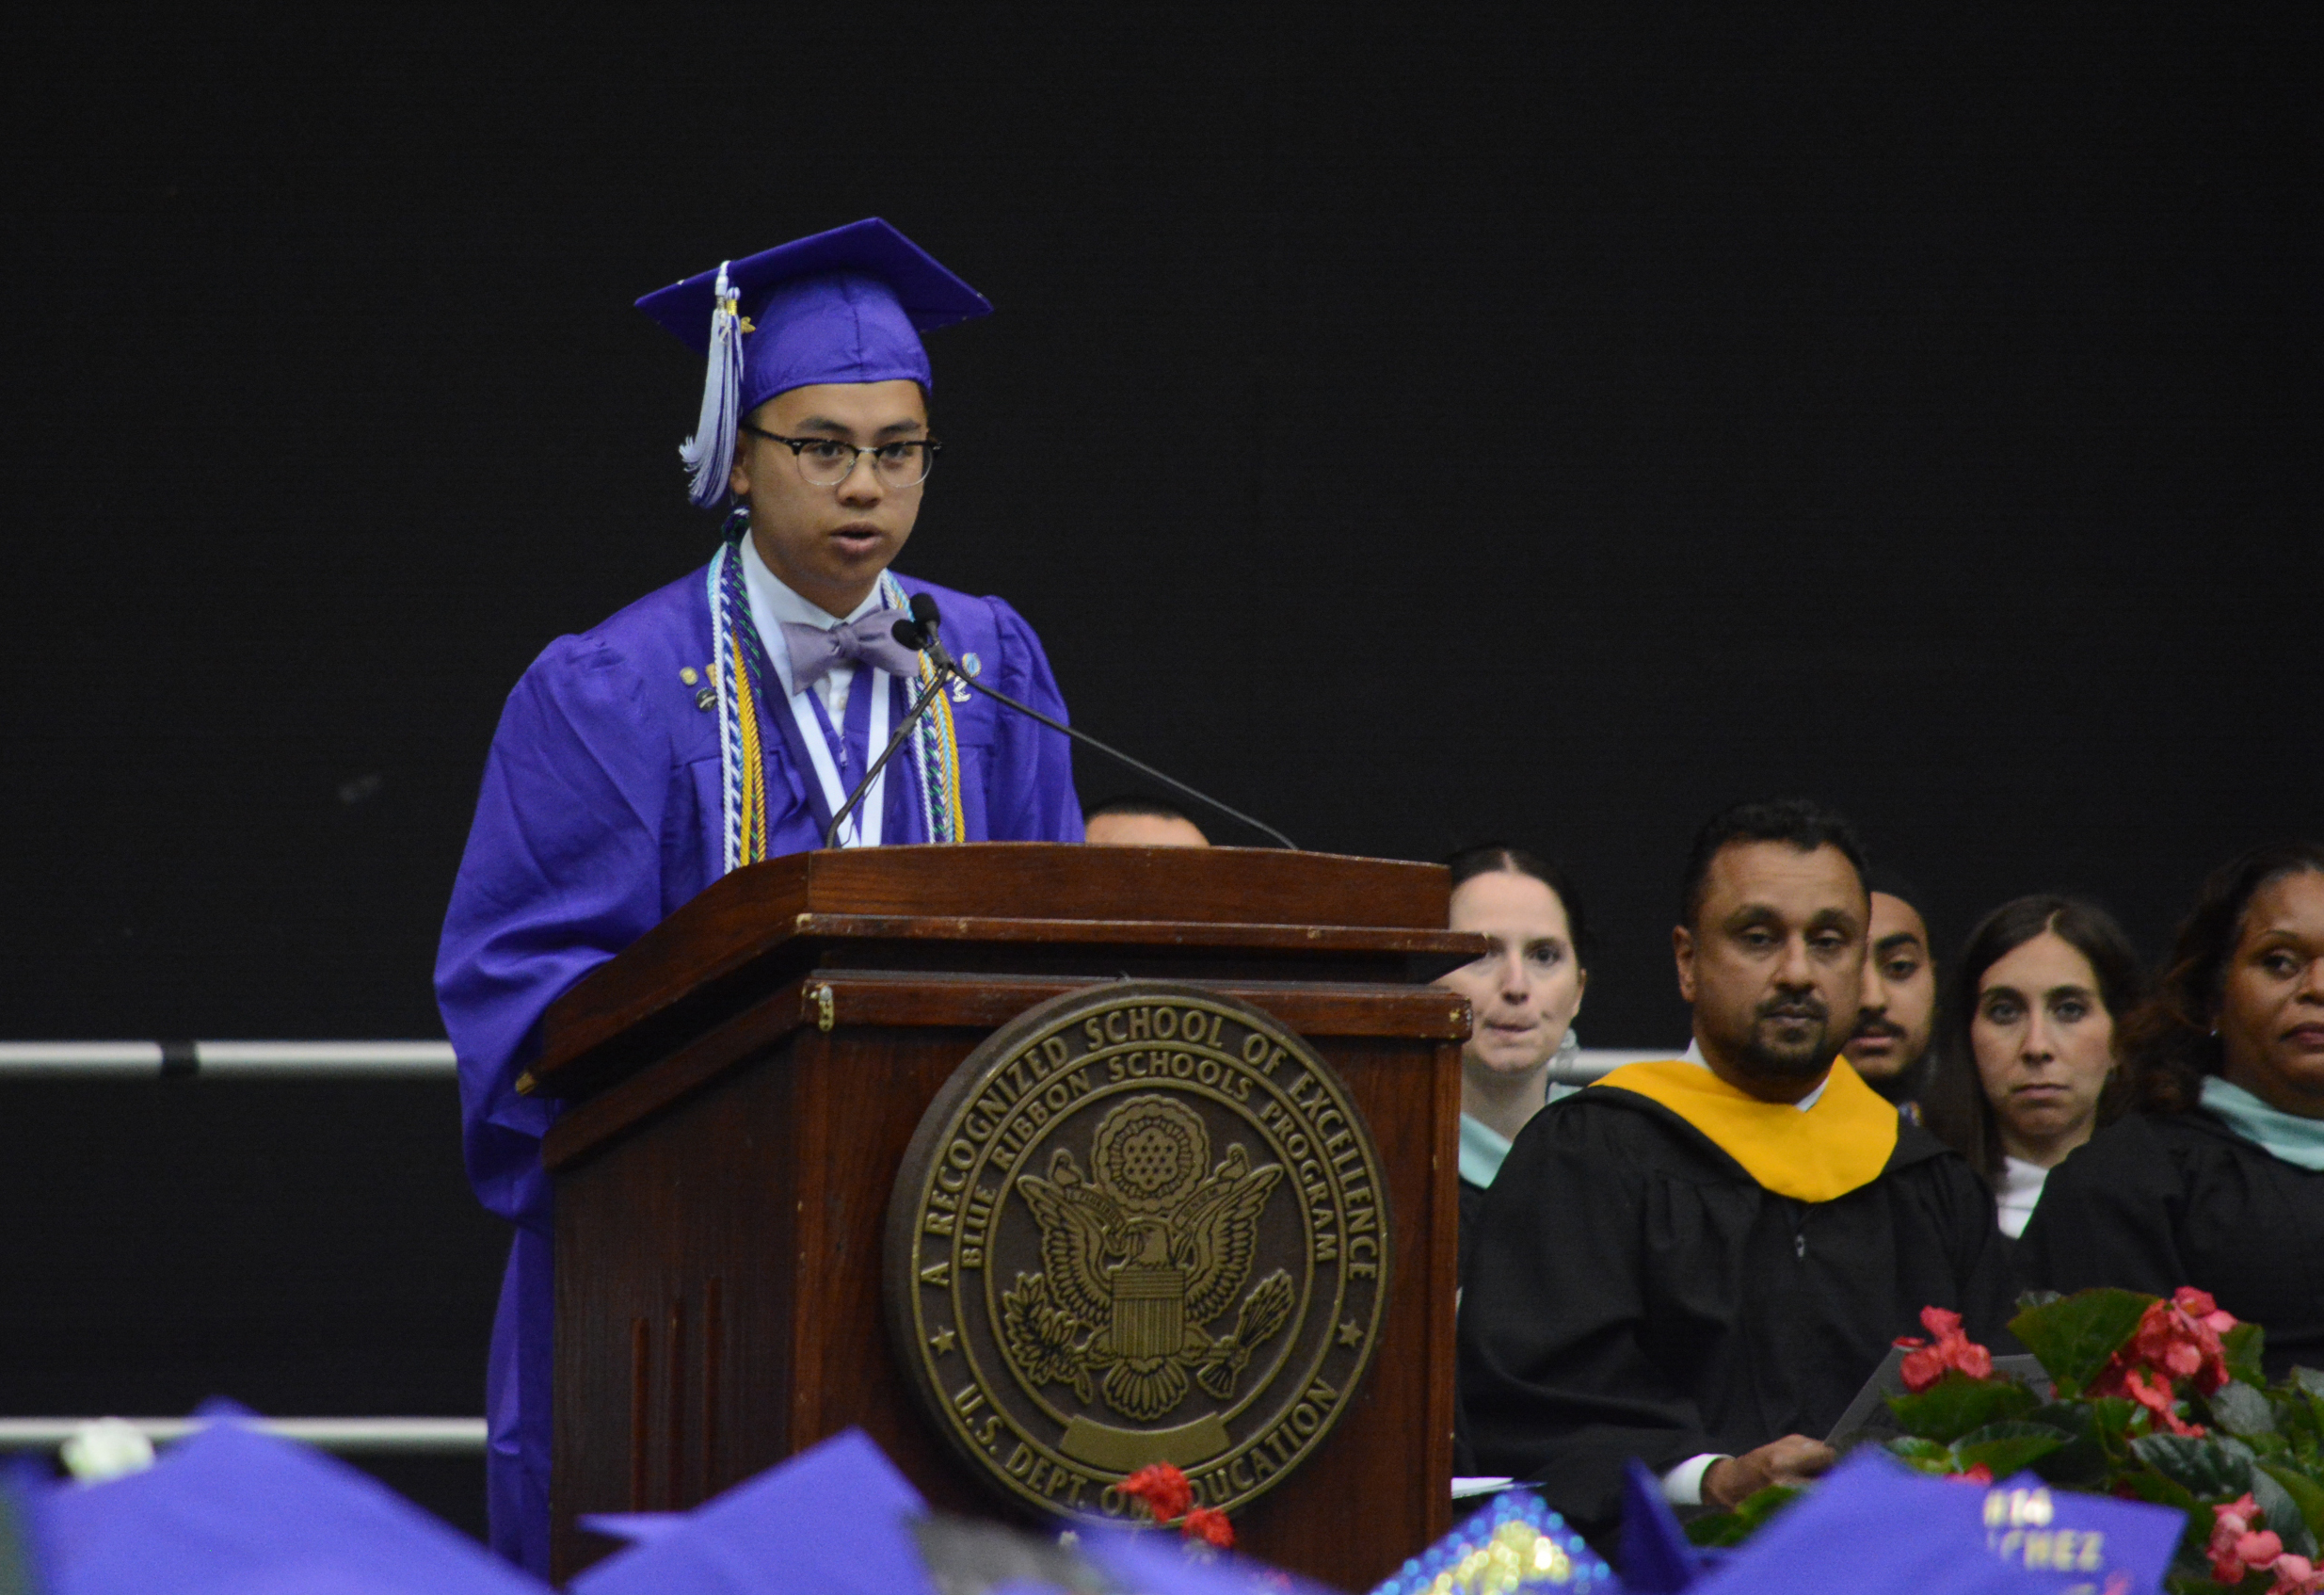 Adrian-James Gevero, the salutatorian of Sewanhaka High School's class of 2018, speaks before more than 200 colleagues and hundreds more in attendance. (Photo by Janelle Clausen)